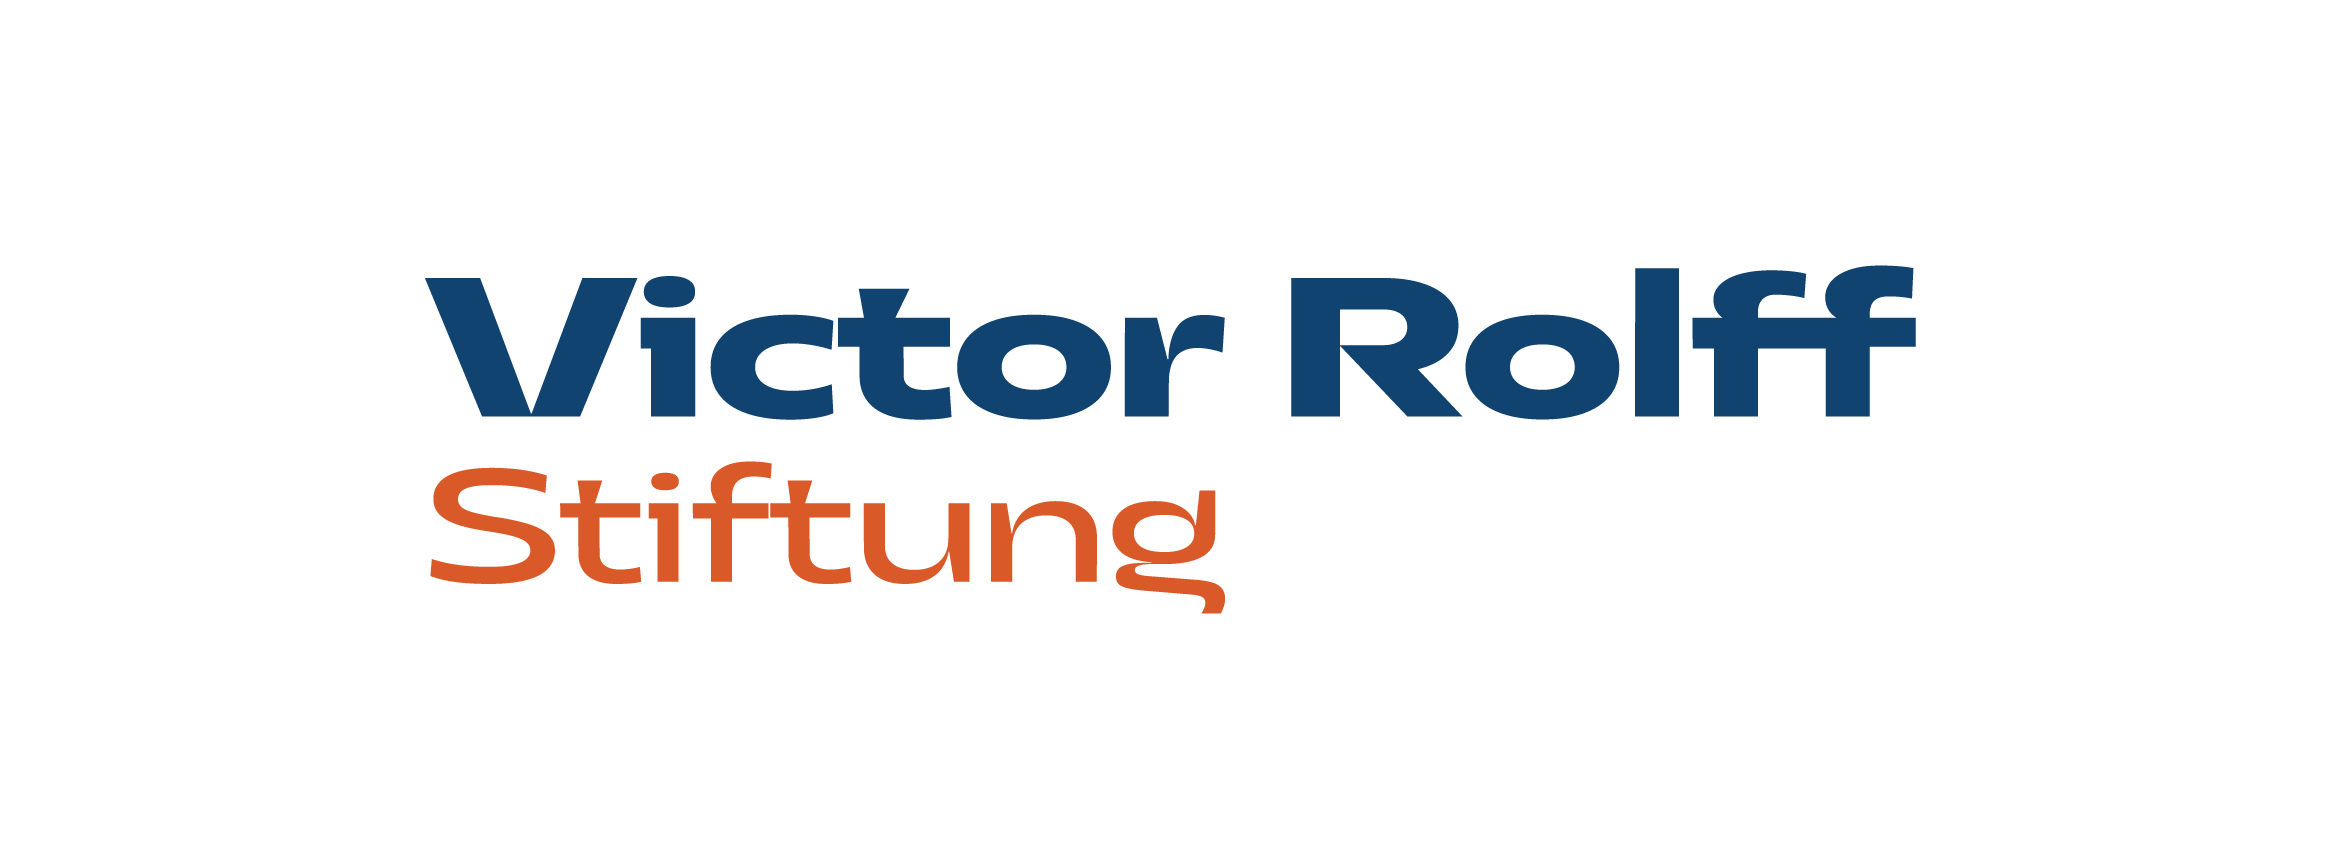 Victor Rolff Stiftung